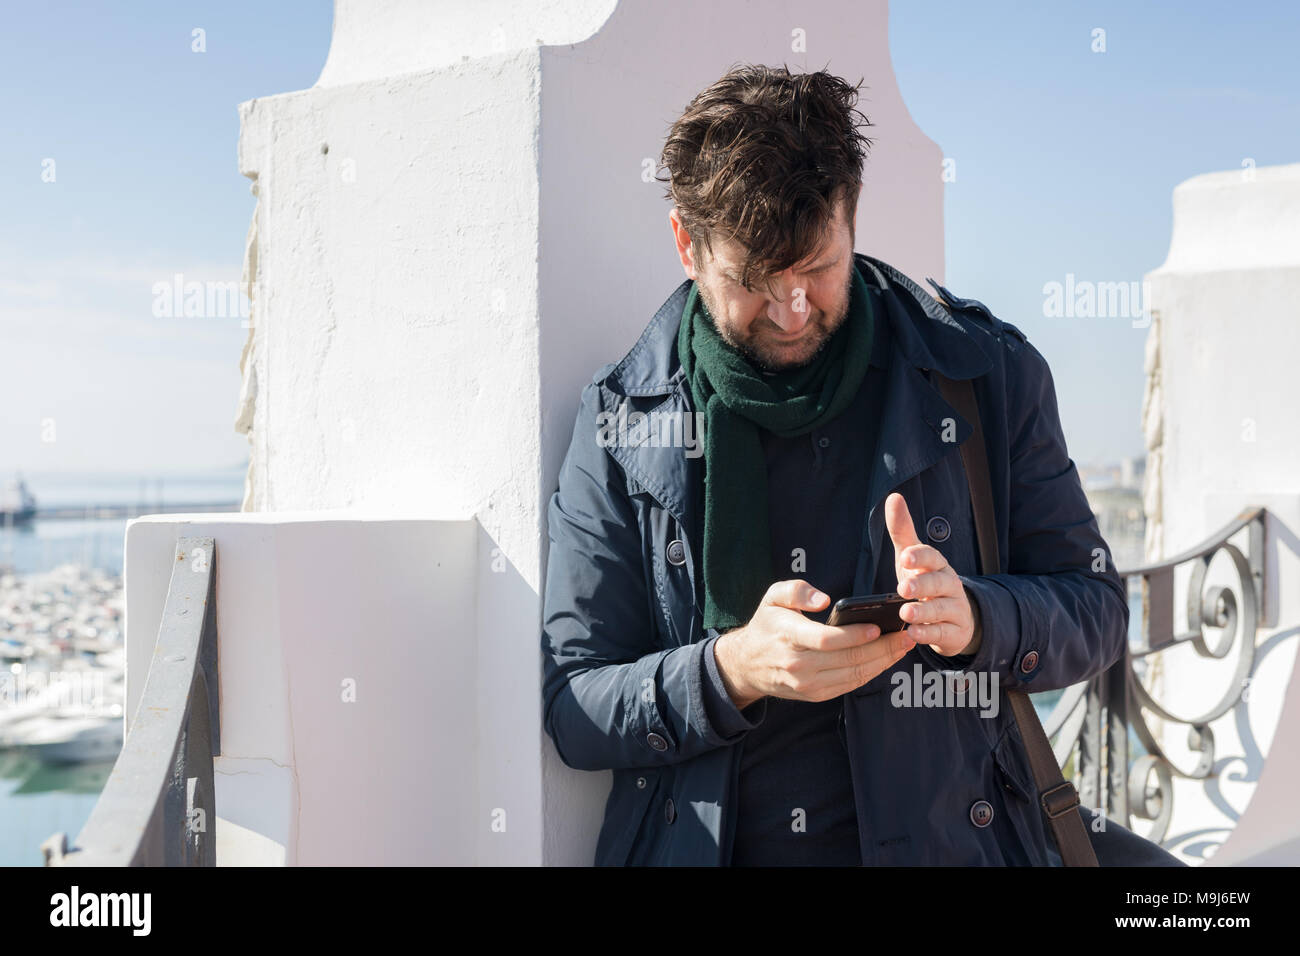 portrait of 45 year old man with blue jacket and mobile in his hand Stock Photo